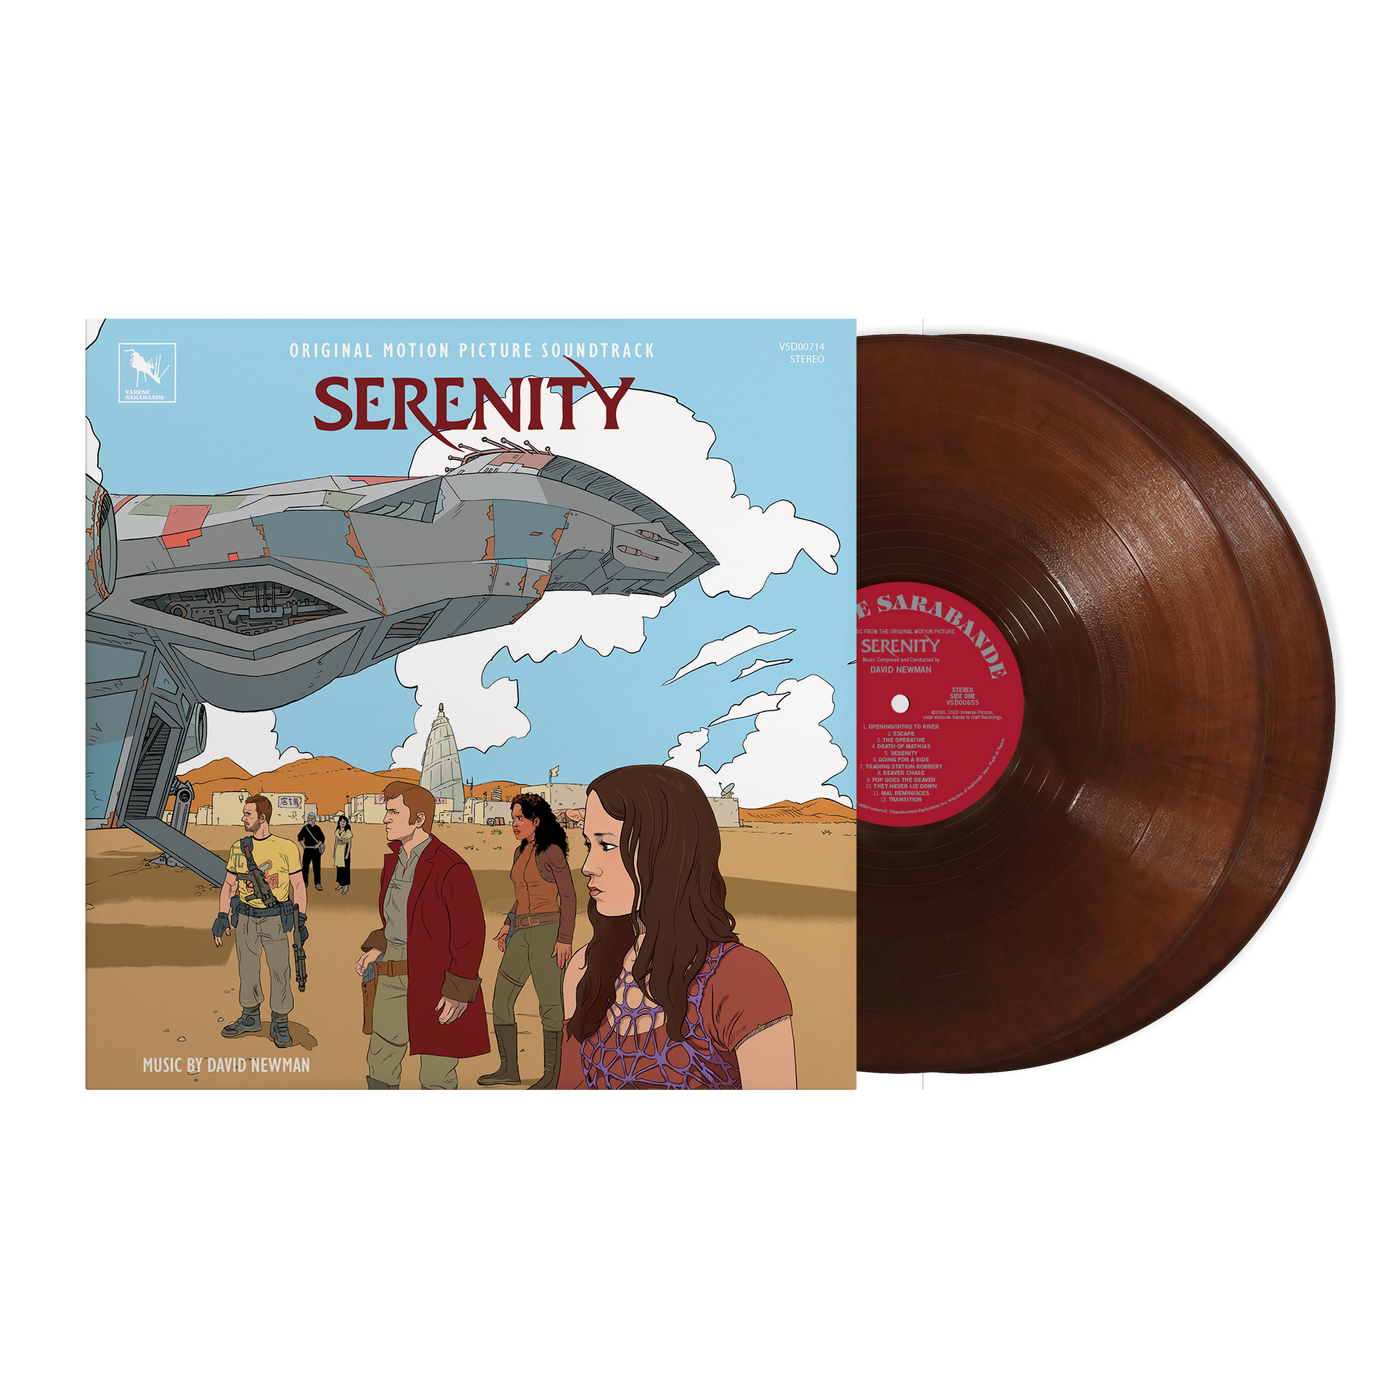 David Newman – Serenity (Deluxe Edition Soundtrack) (Browncoat 2-LP) Limited Edition of 500 Copies